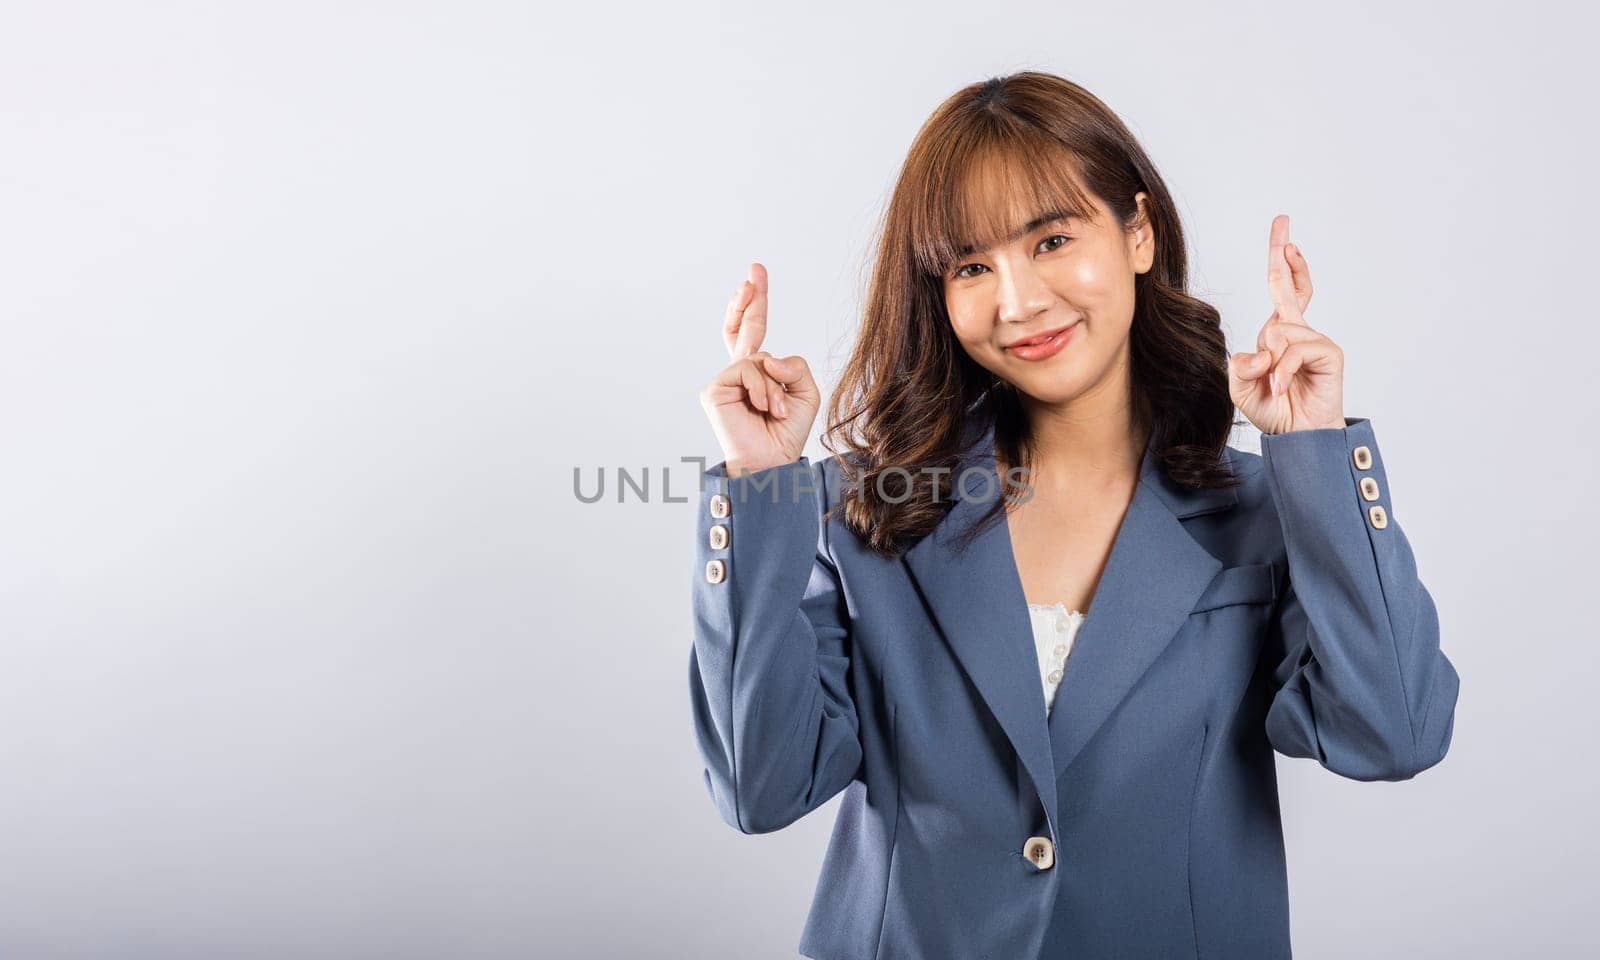 Superstition meets joy in this studio shot of a cute Asian lady. She holds crossed fingers, symbolizing hope and positivity. Isolated on a white background, her expressive face shines with happiness.